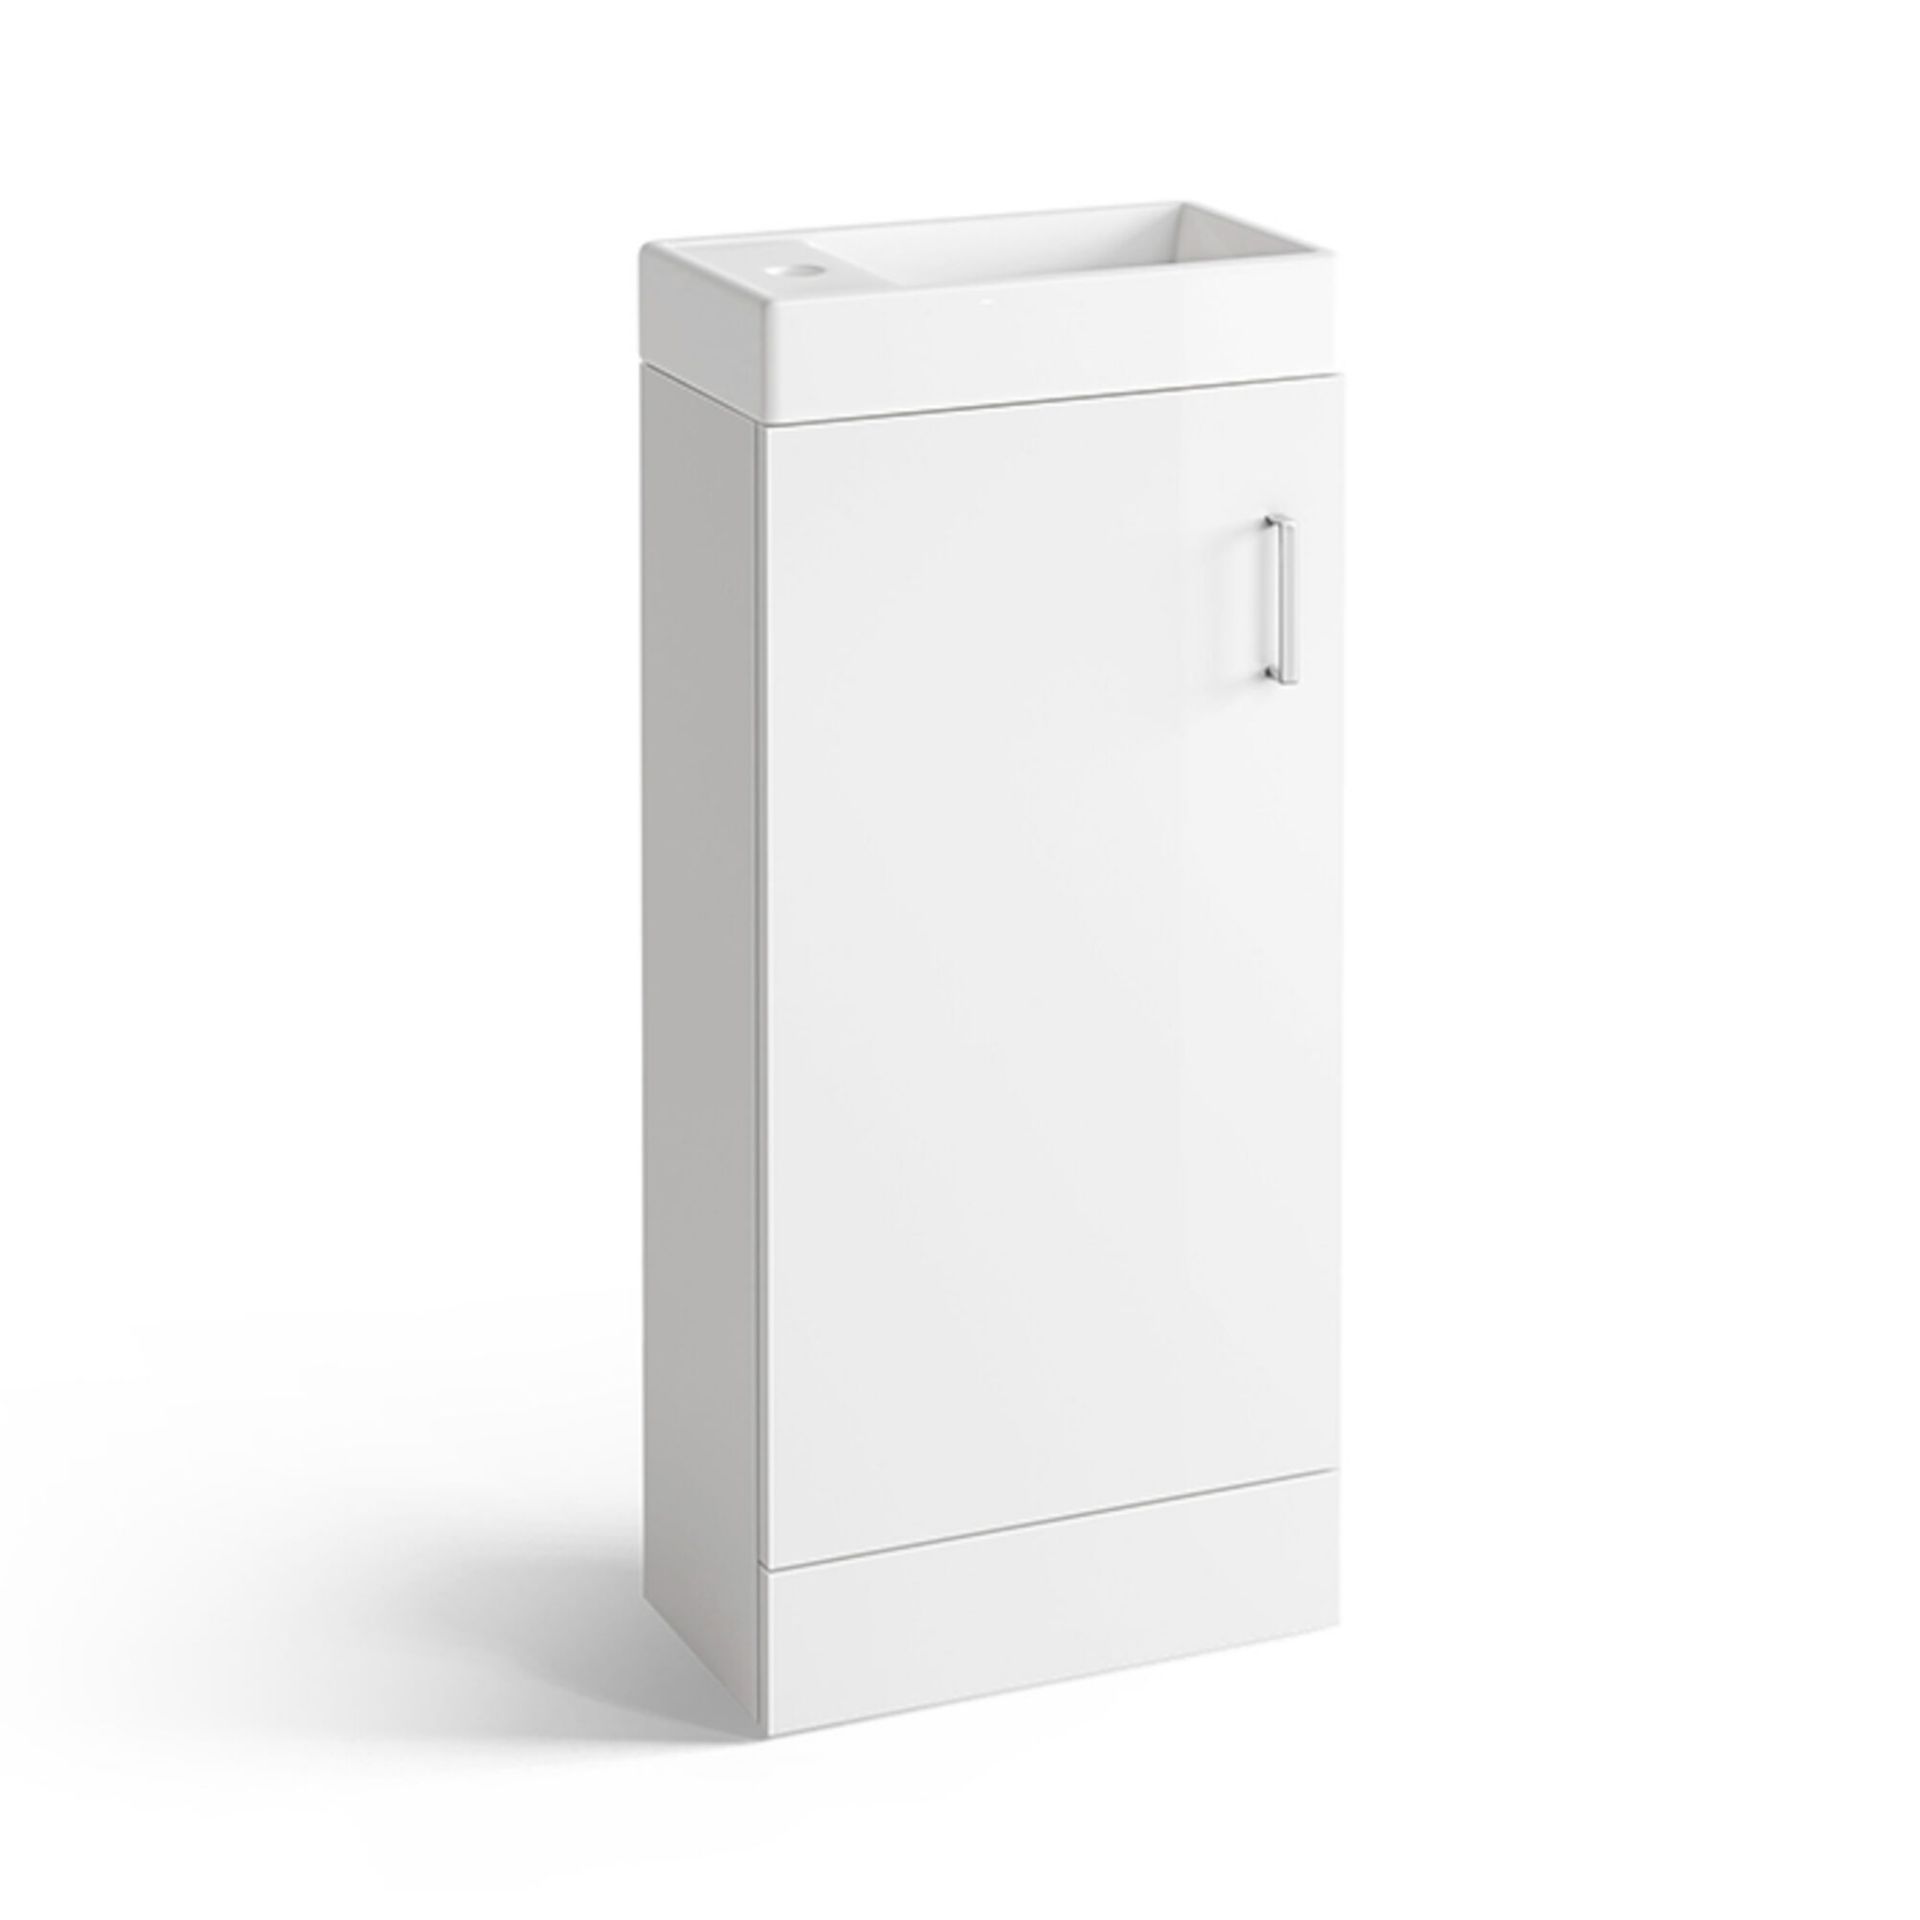 (KR143) White Slimline Freestanding Basin Unit. RRP £55.00. Comes complete with basin. Stylish